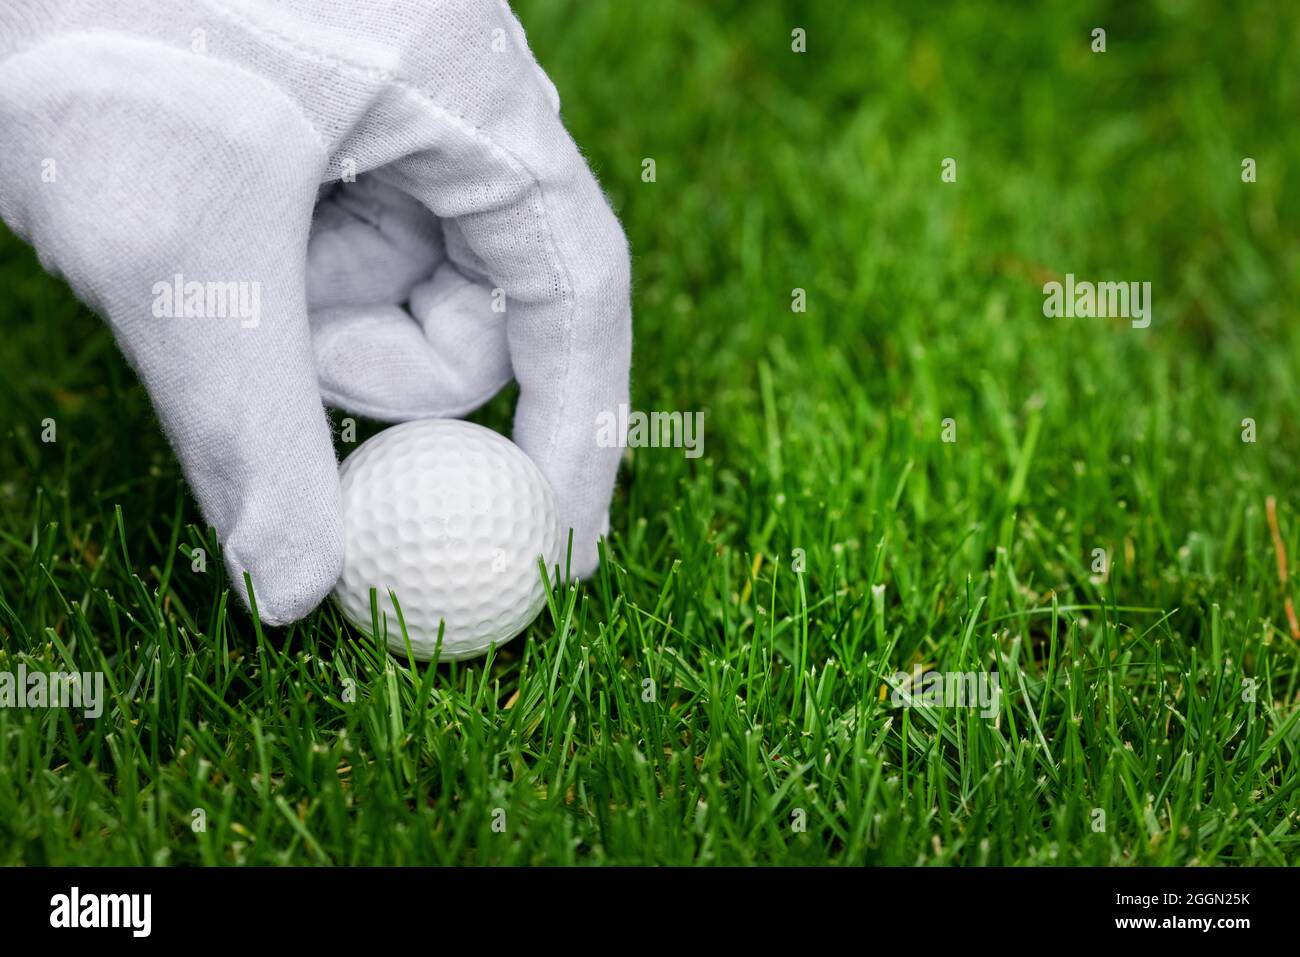 hand with white glove put a golf ball on grass. copy space Stock Photo